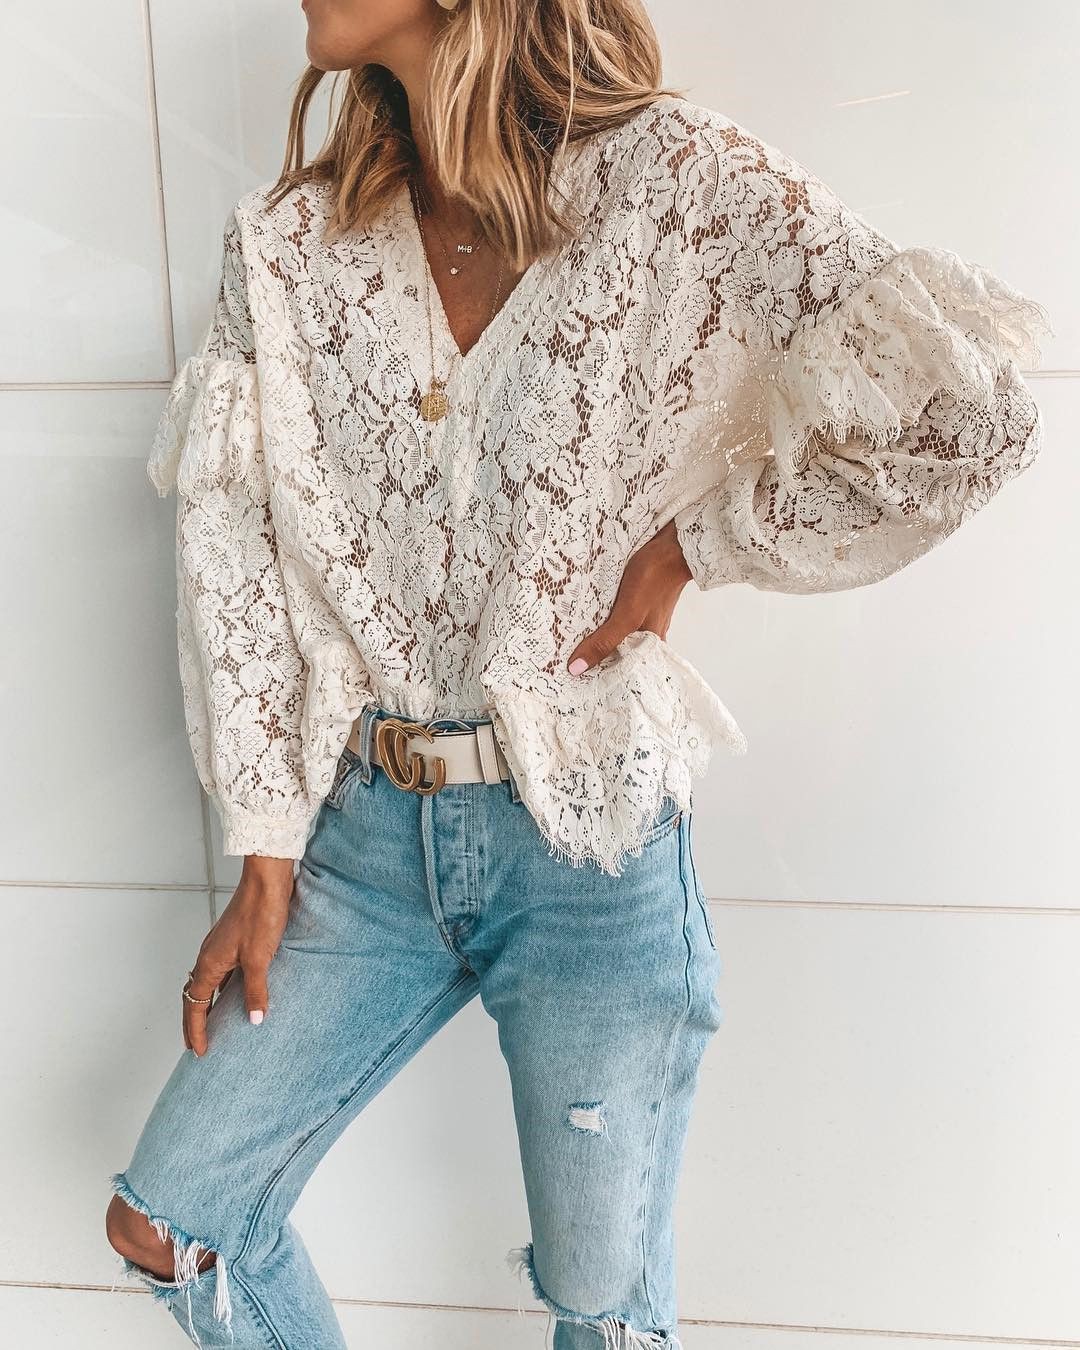 White outfit ideas with sweater, blouse, shirt: T-Shirt Outfit,  White Outfit,  Lace Outfits  